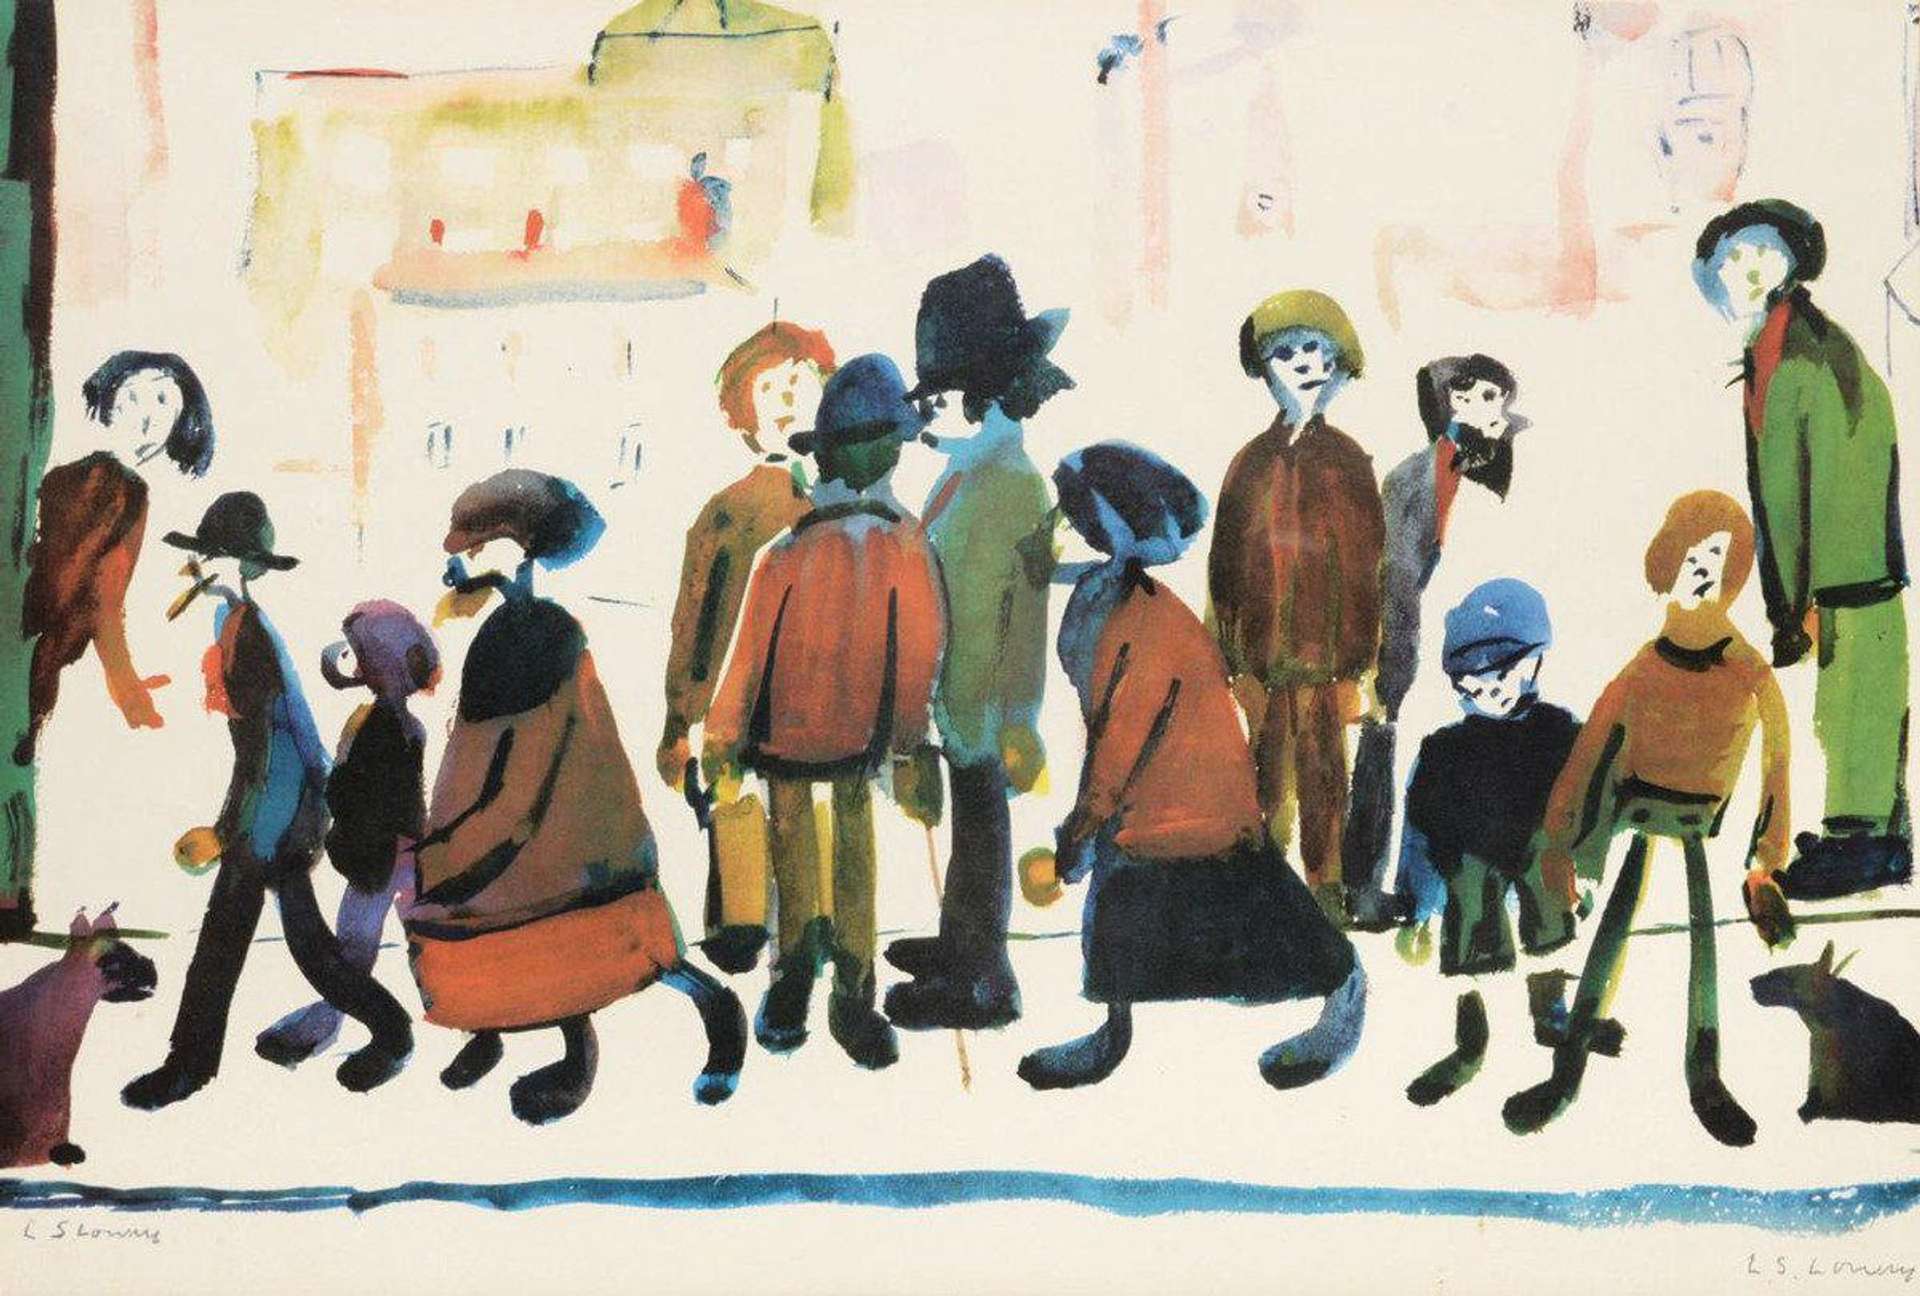 L.S. Lowry’s People Standing About. A lithograph of a group of people standing about on a local street, dressed in a variety of colourful coats. 